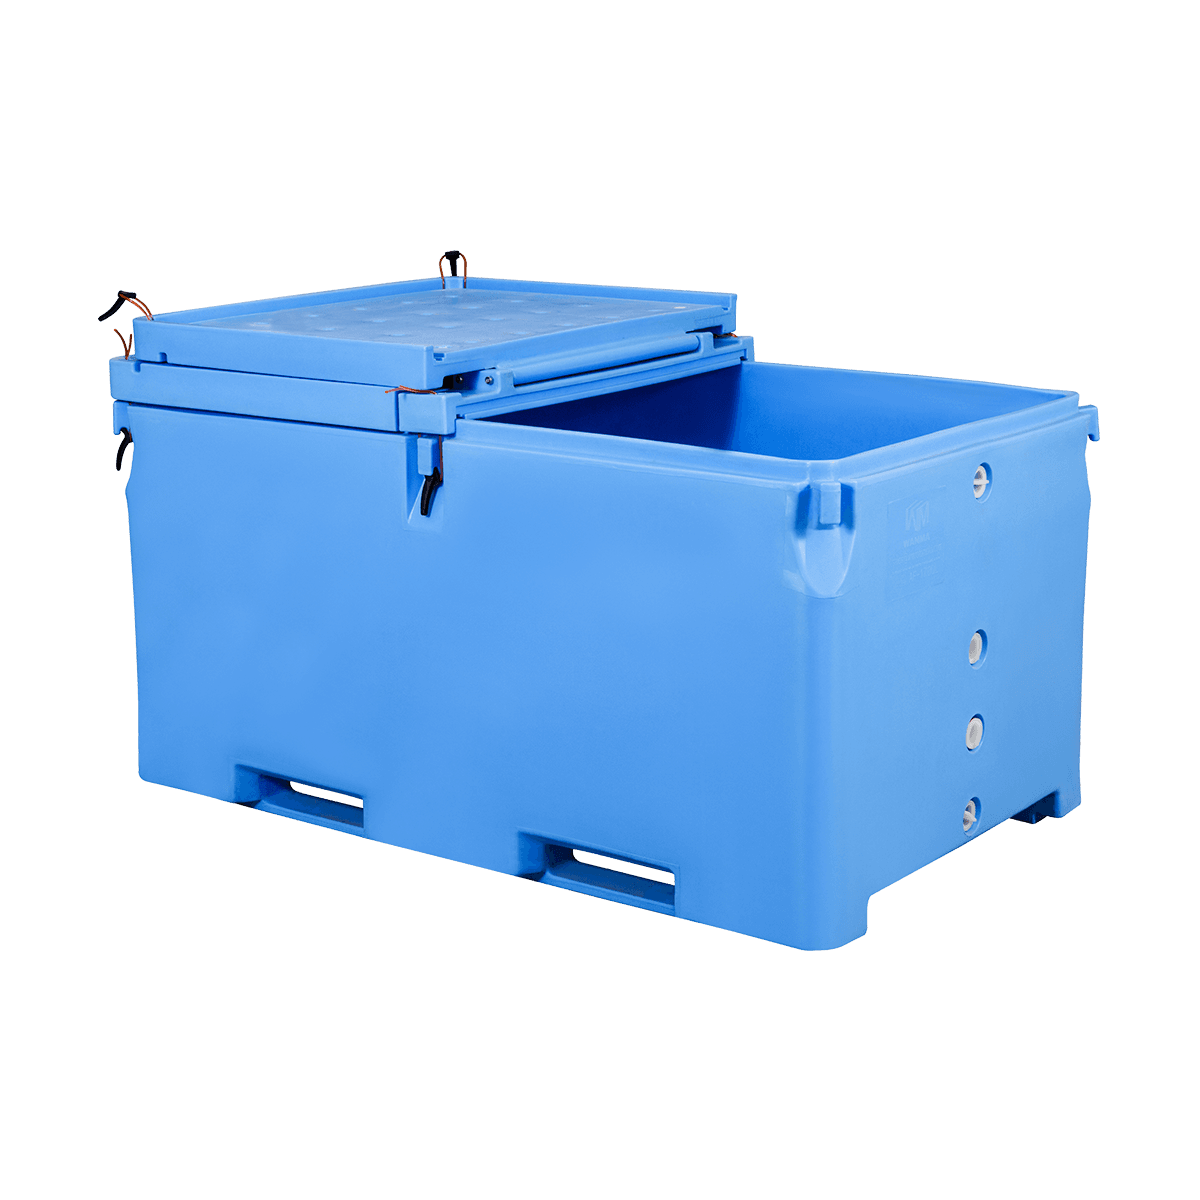 AF-1700L Extra Large Lobster Containers Seafood Industrial Use Plastic Containers